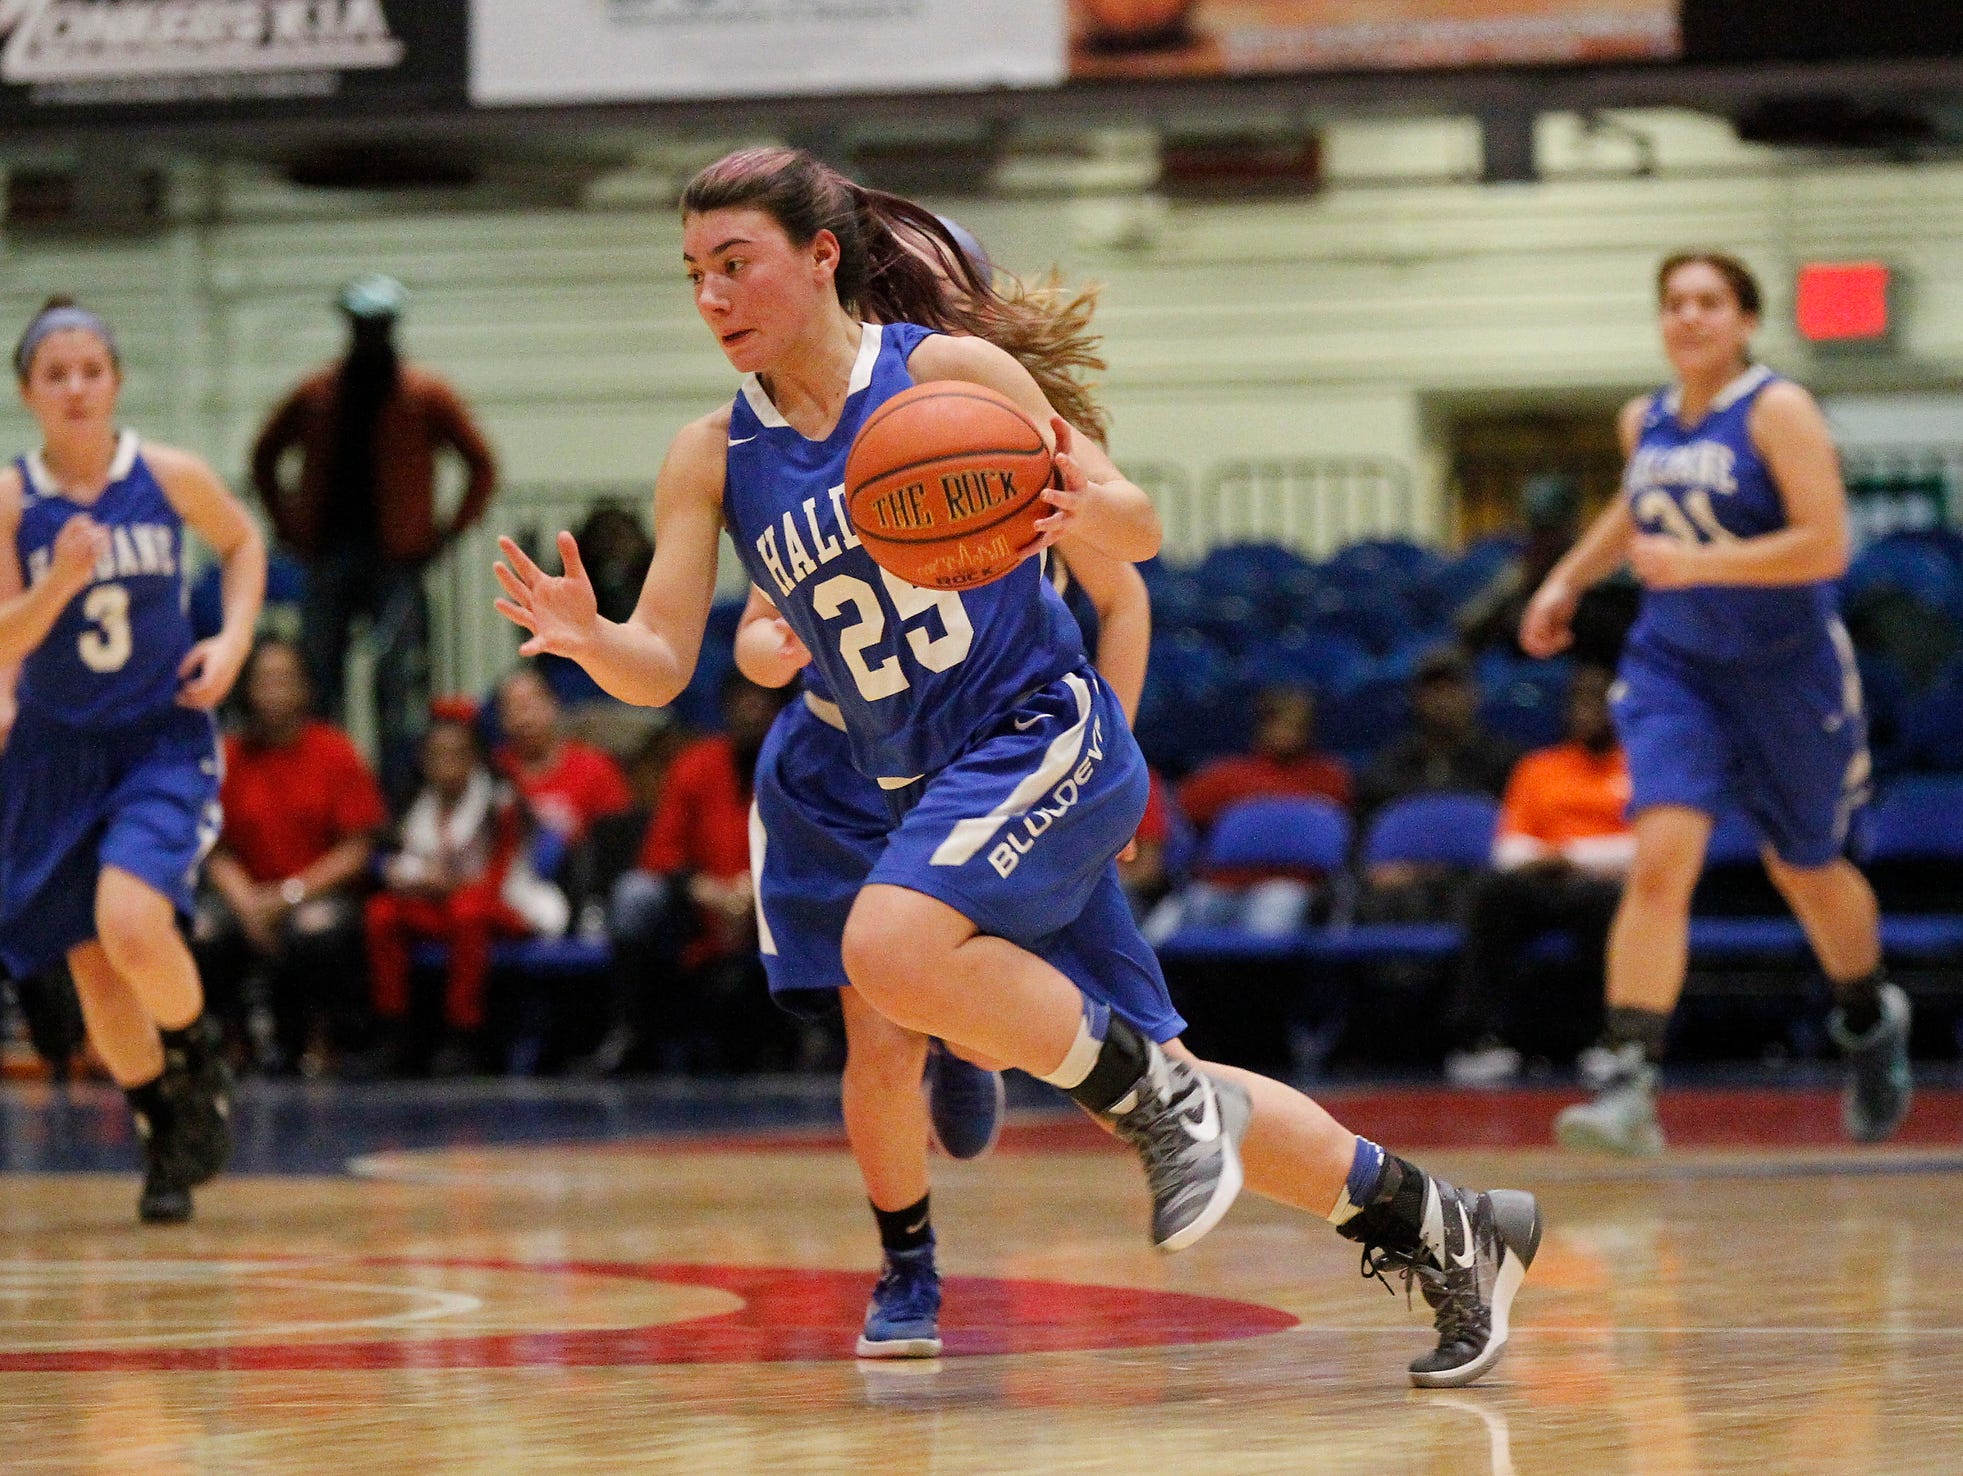 Haldane's Abbey Scanga (25) works the ball across mid-court during the class C semi-final basketball game against Hamilton at the Westchester County Center in White Plains on Saturday, February 27, 2016.